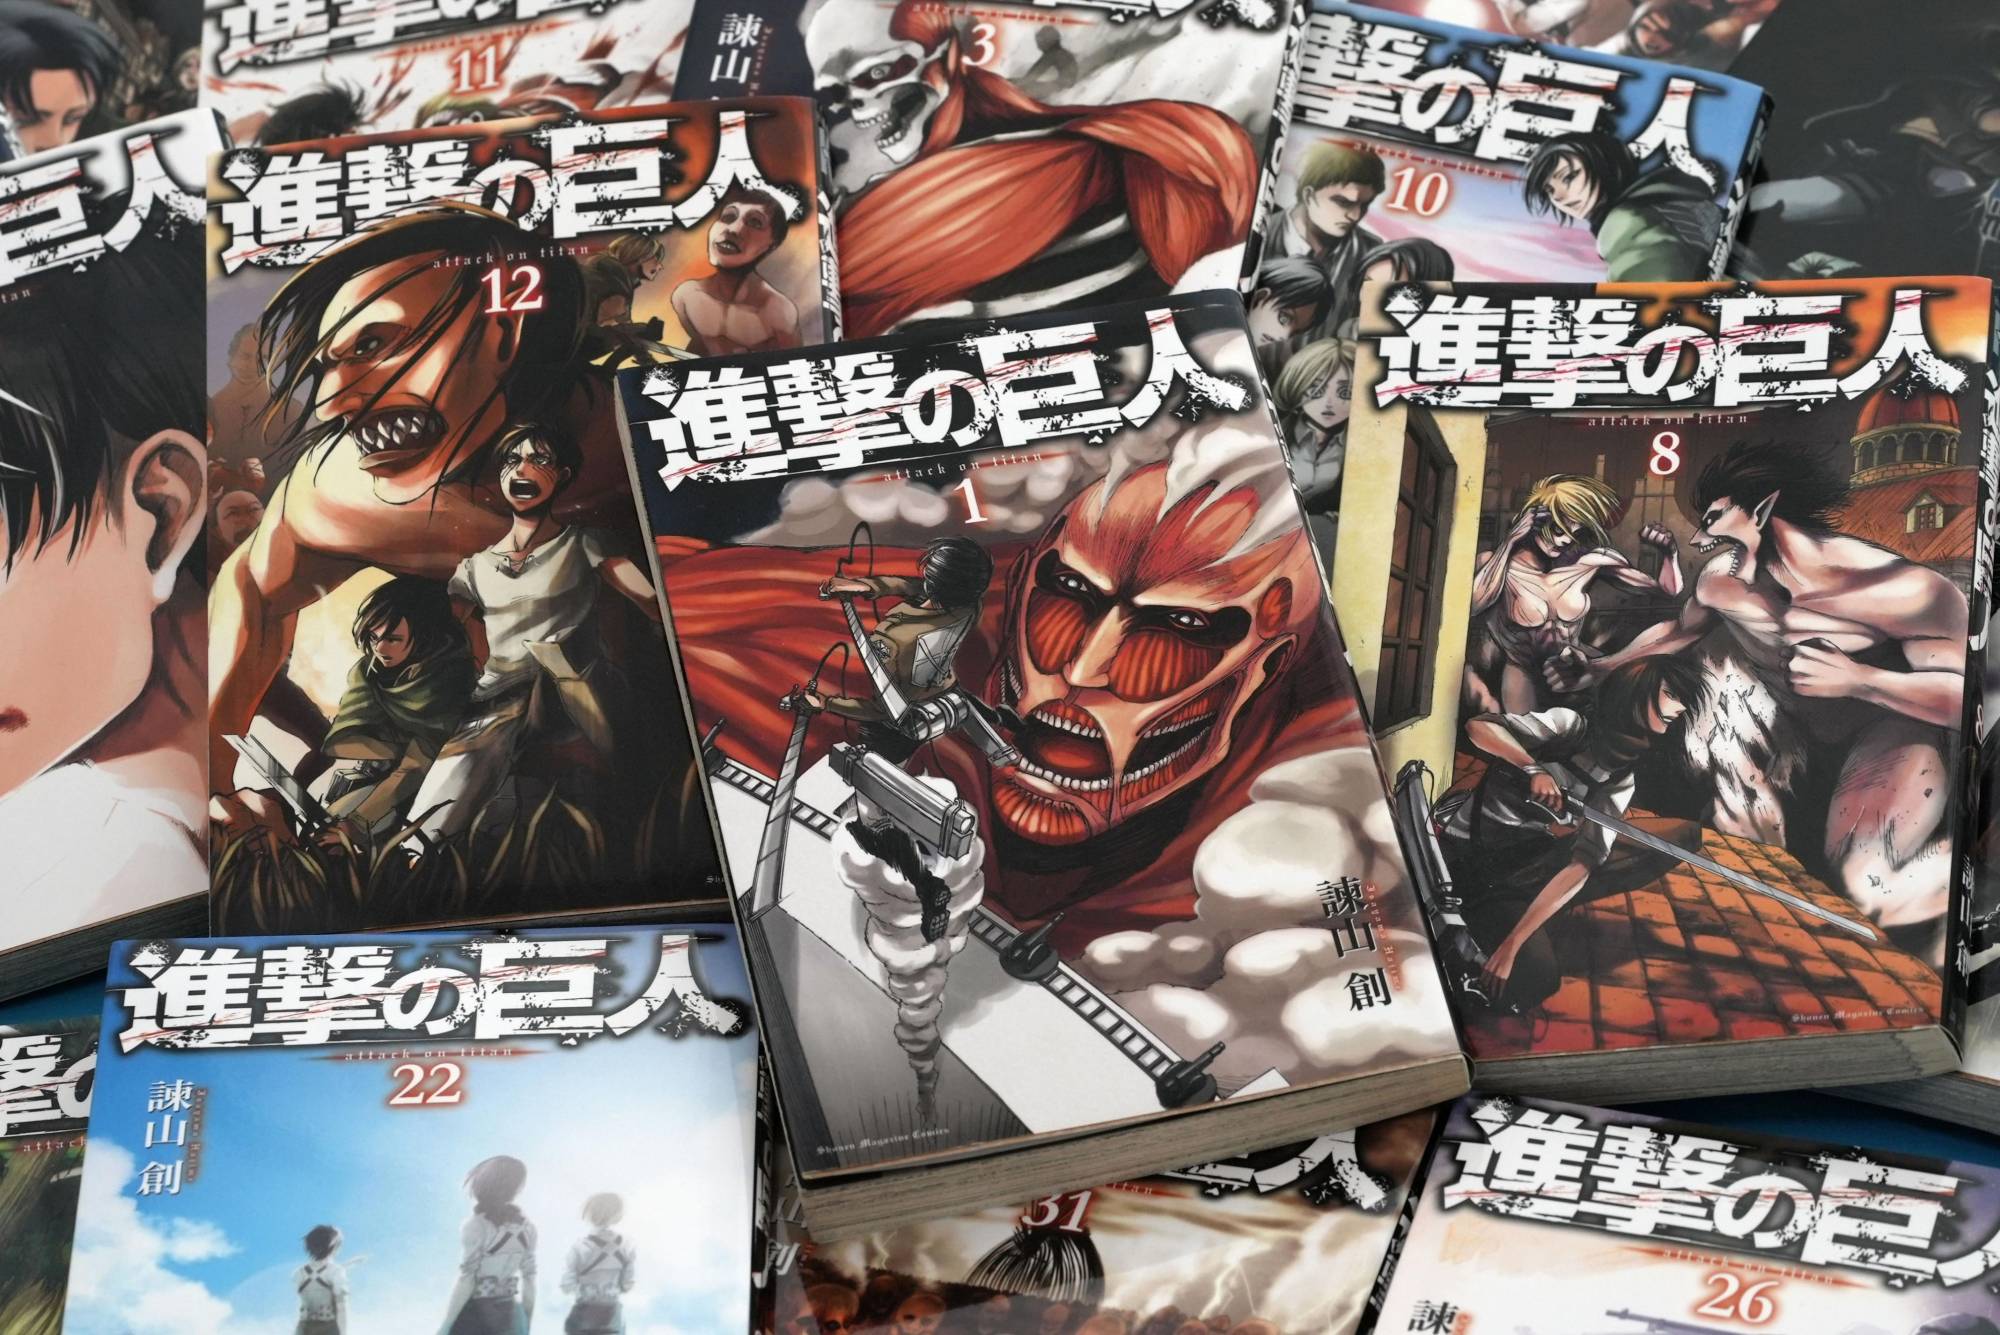 Smash-hit 'Attack on Titan' spoke to chaotic modern times | The Japan Times